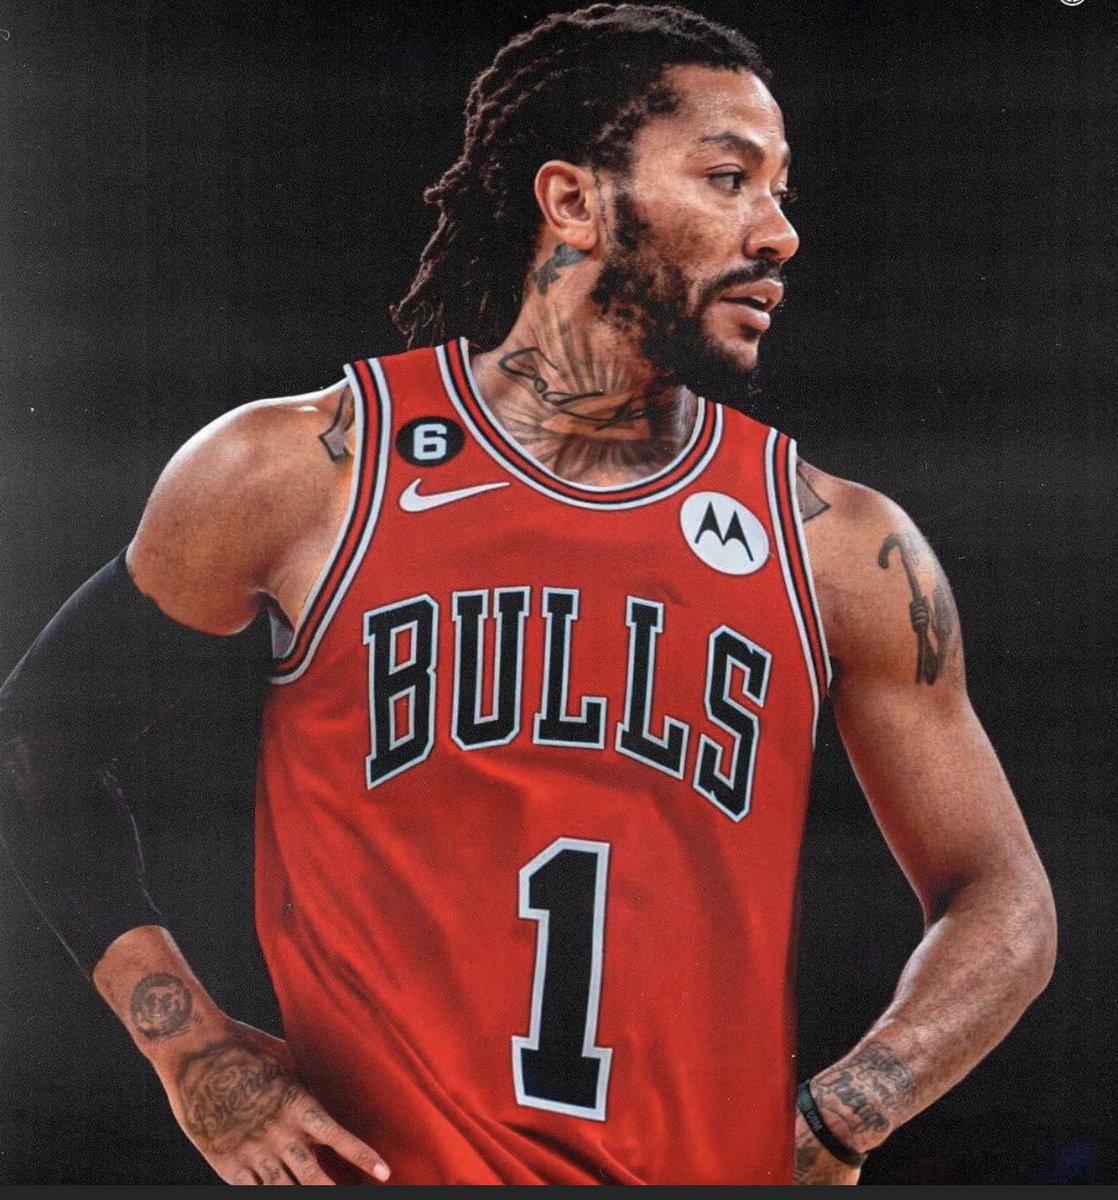 The Chicago #Bulls are interested in signing Derrick Rose, per @TheSteinLine.

Buzz around the league is D Rose WILL return home to finish his career in Chicago.